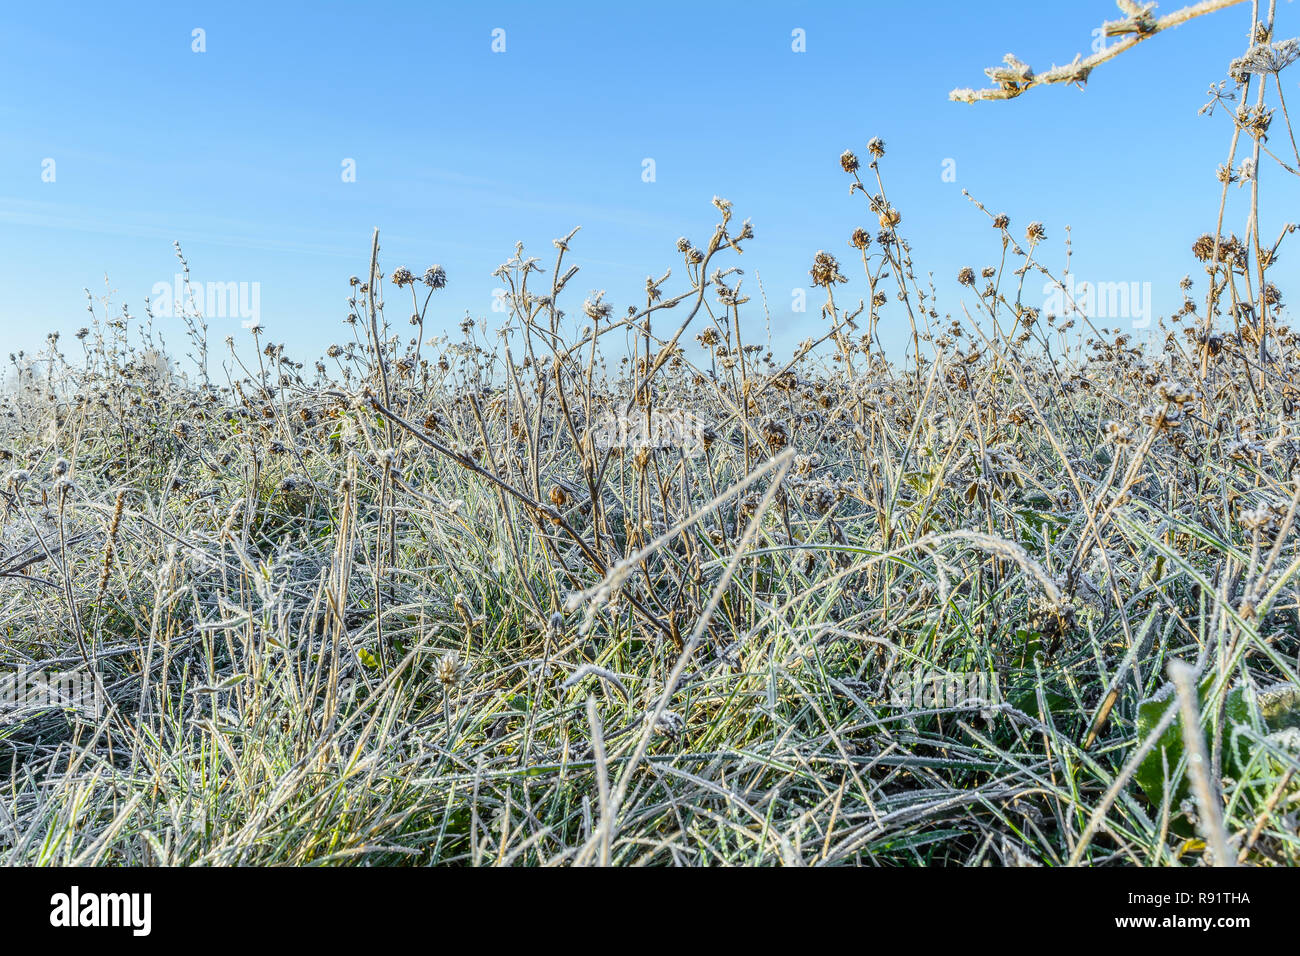 First frost, Frost In The Field, Frost On Plants, Frost On The Grass, Frost On The Leaves, Frost On The Meadow Stock Photo